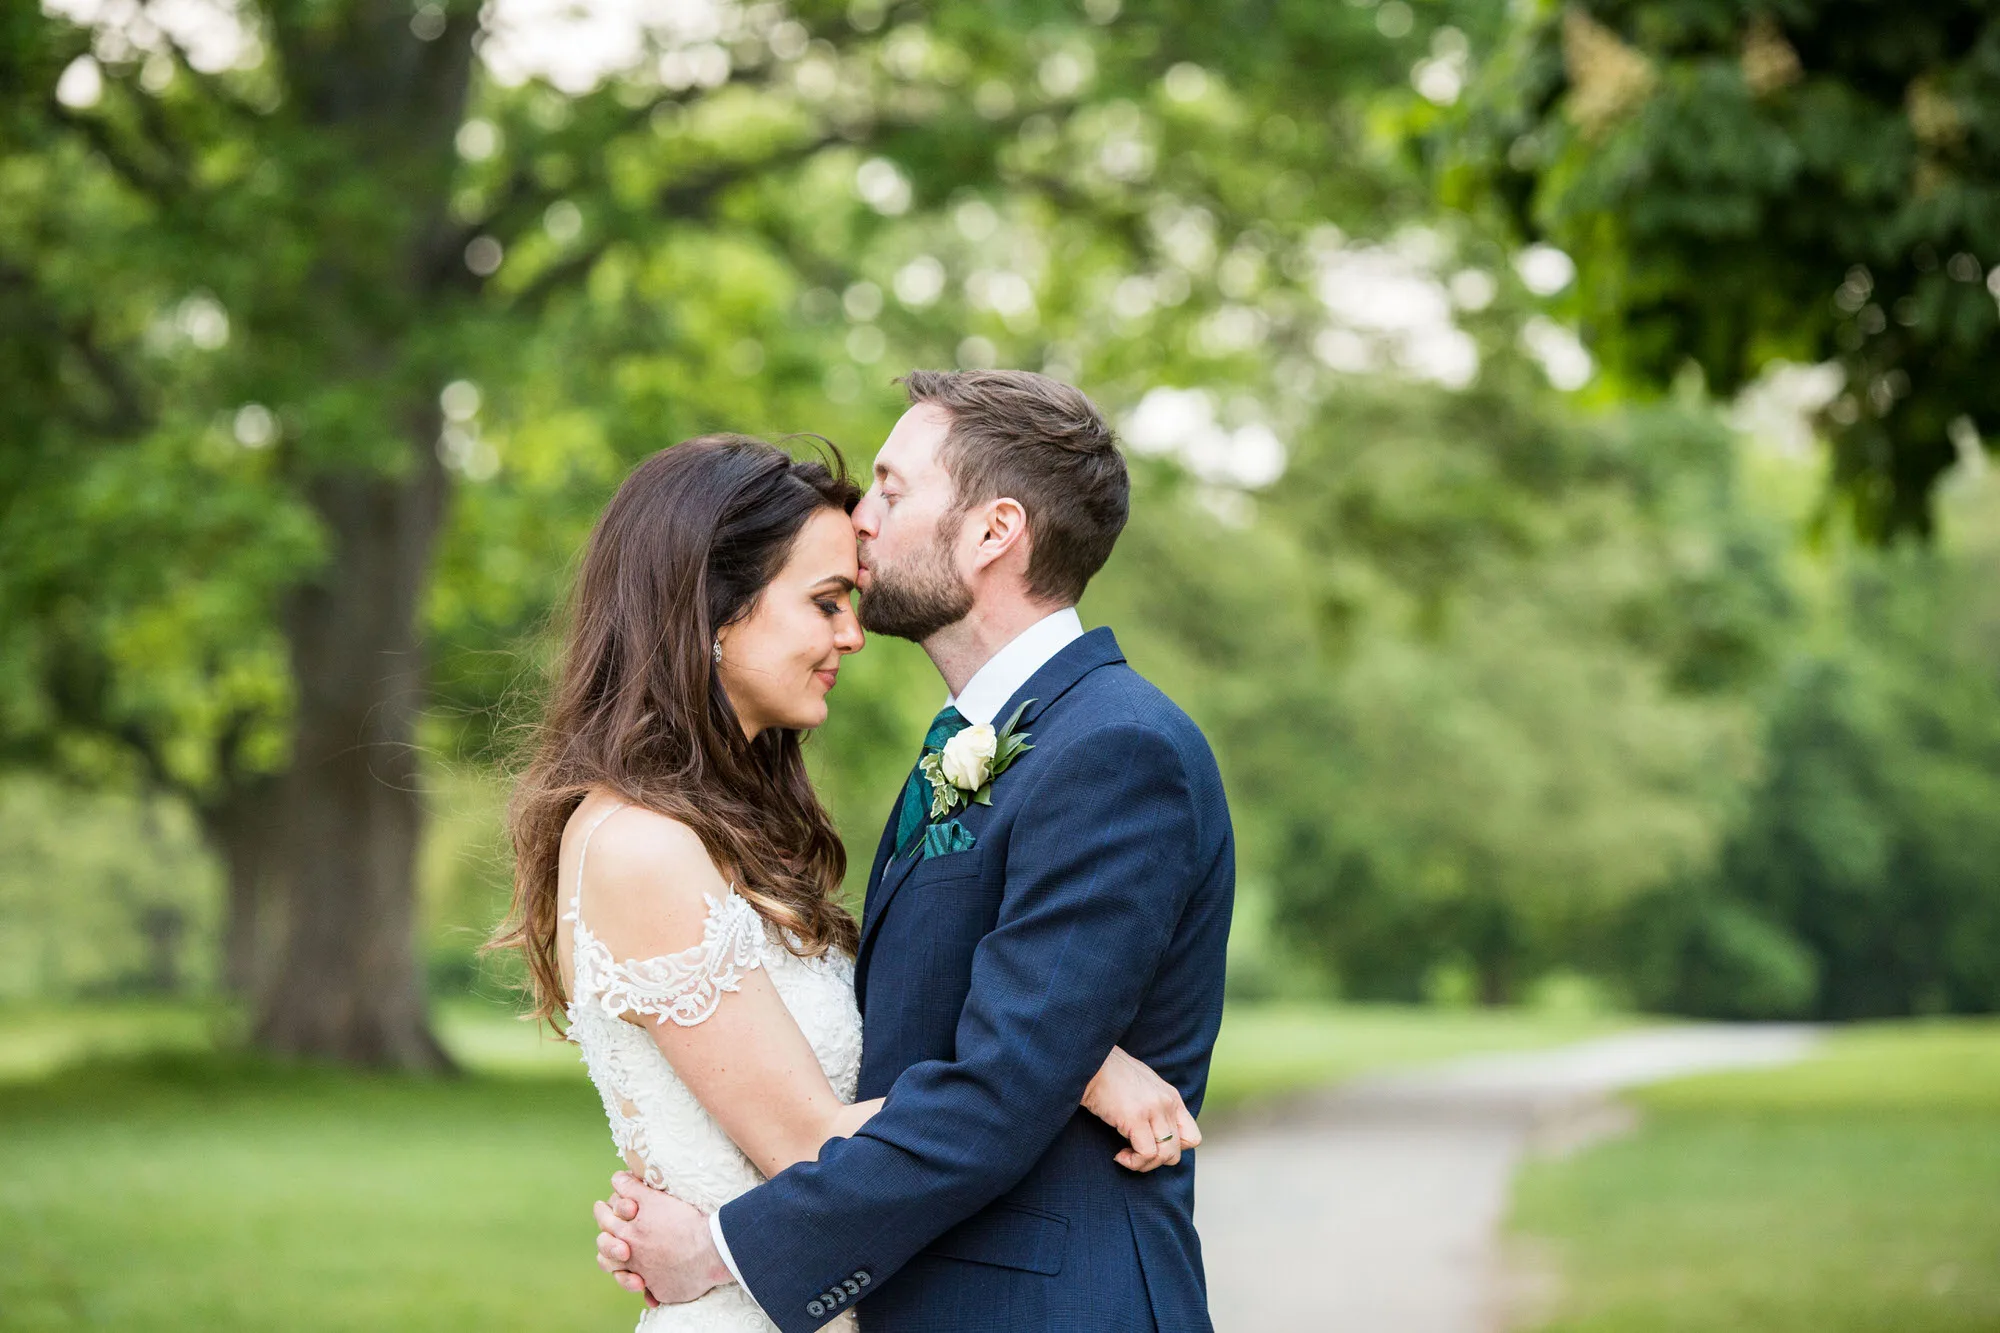 Wedding Photography Packages - Bride & Groom share a moment together in a South London park